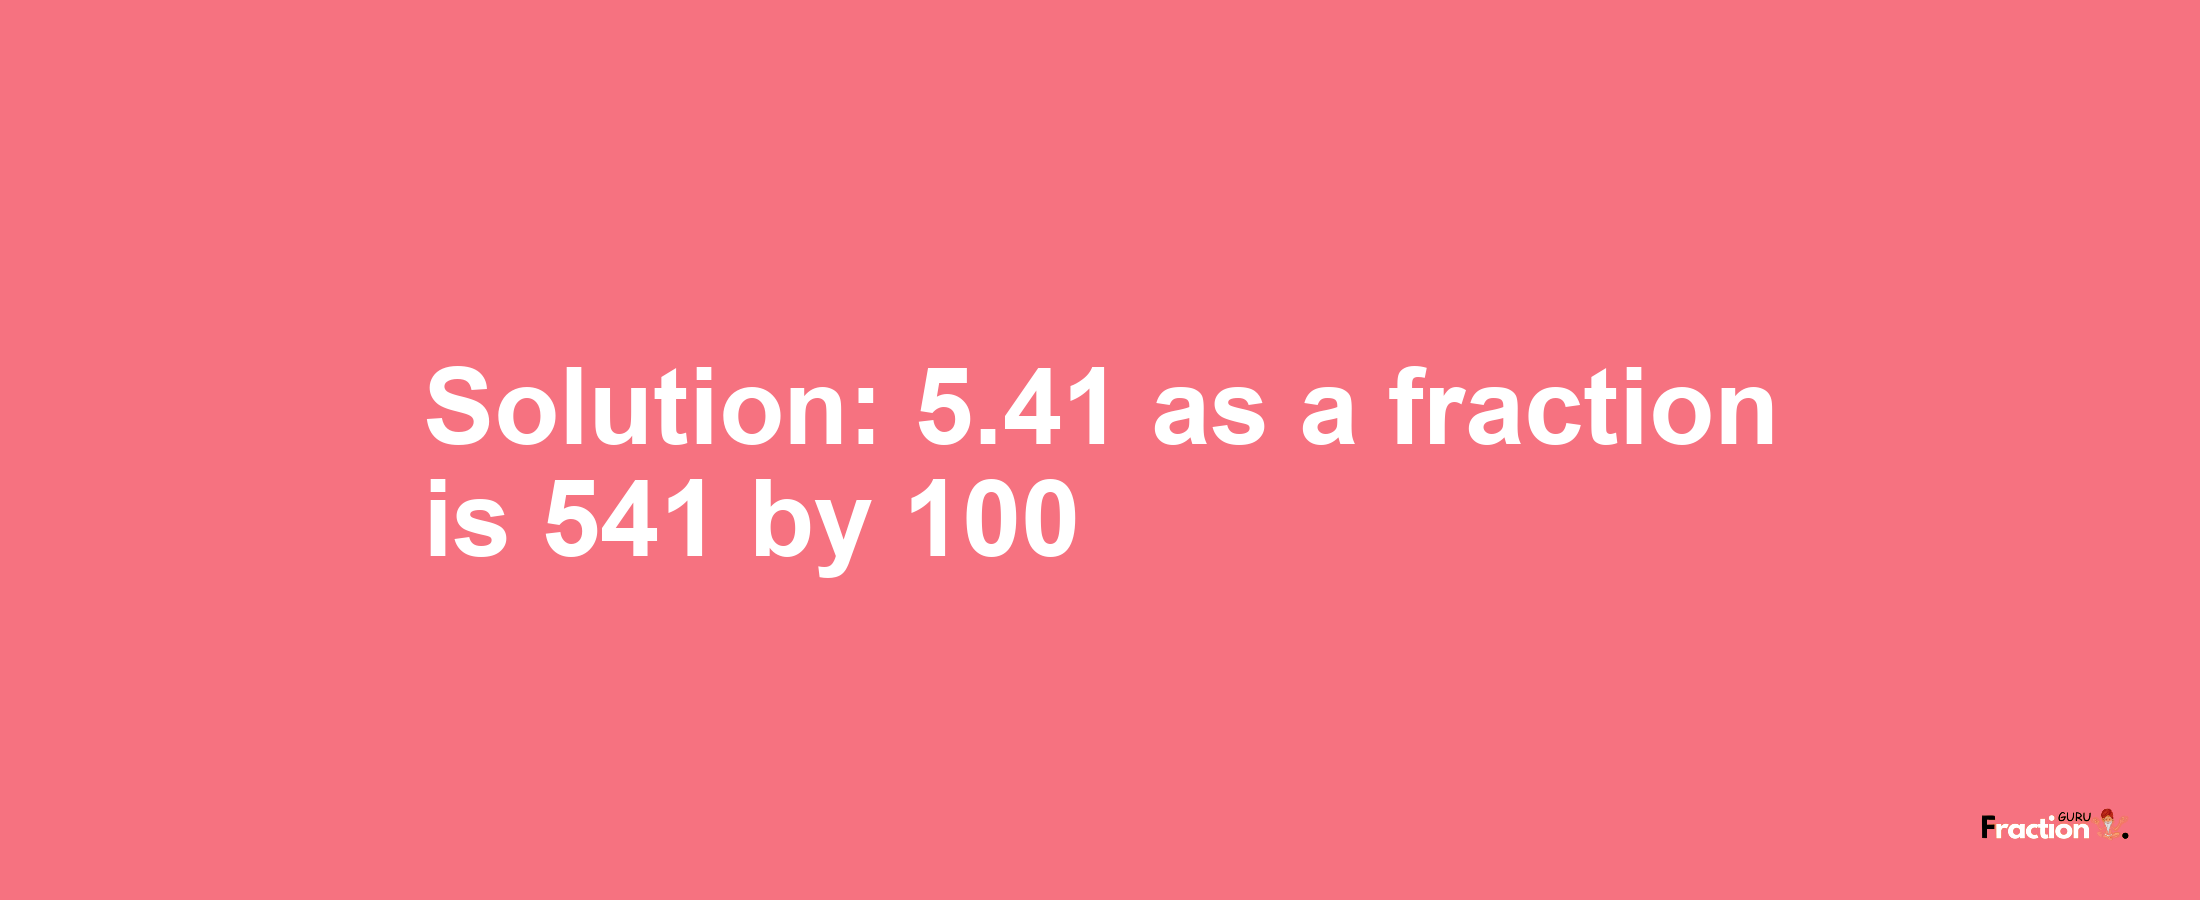 Solution:5.41 as a fraction is 541/100